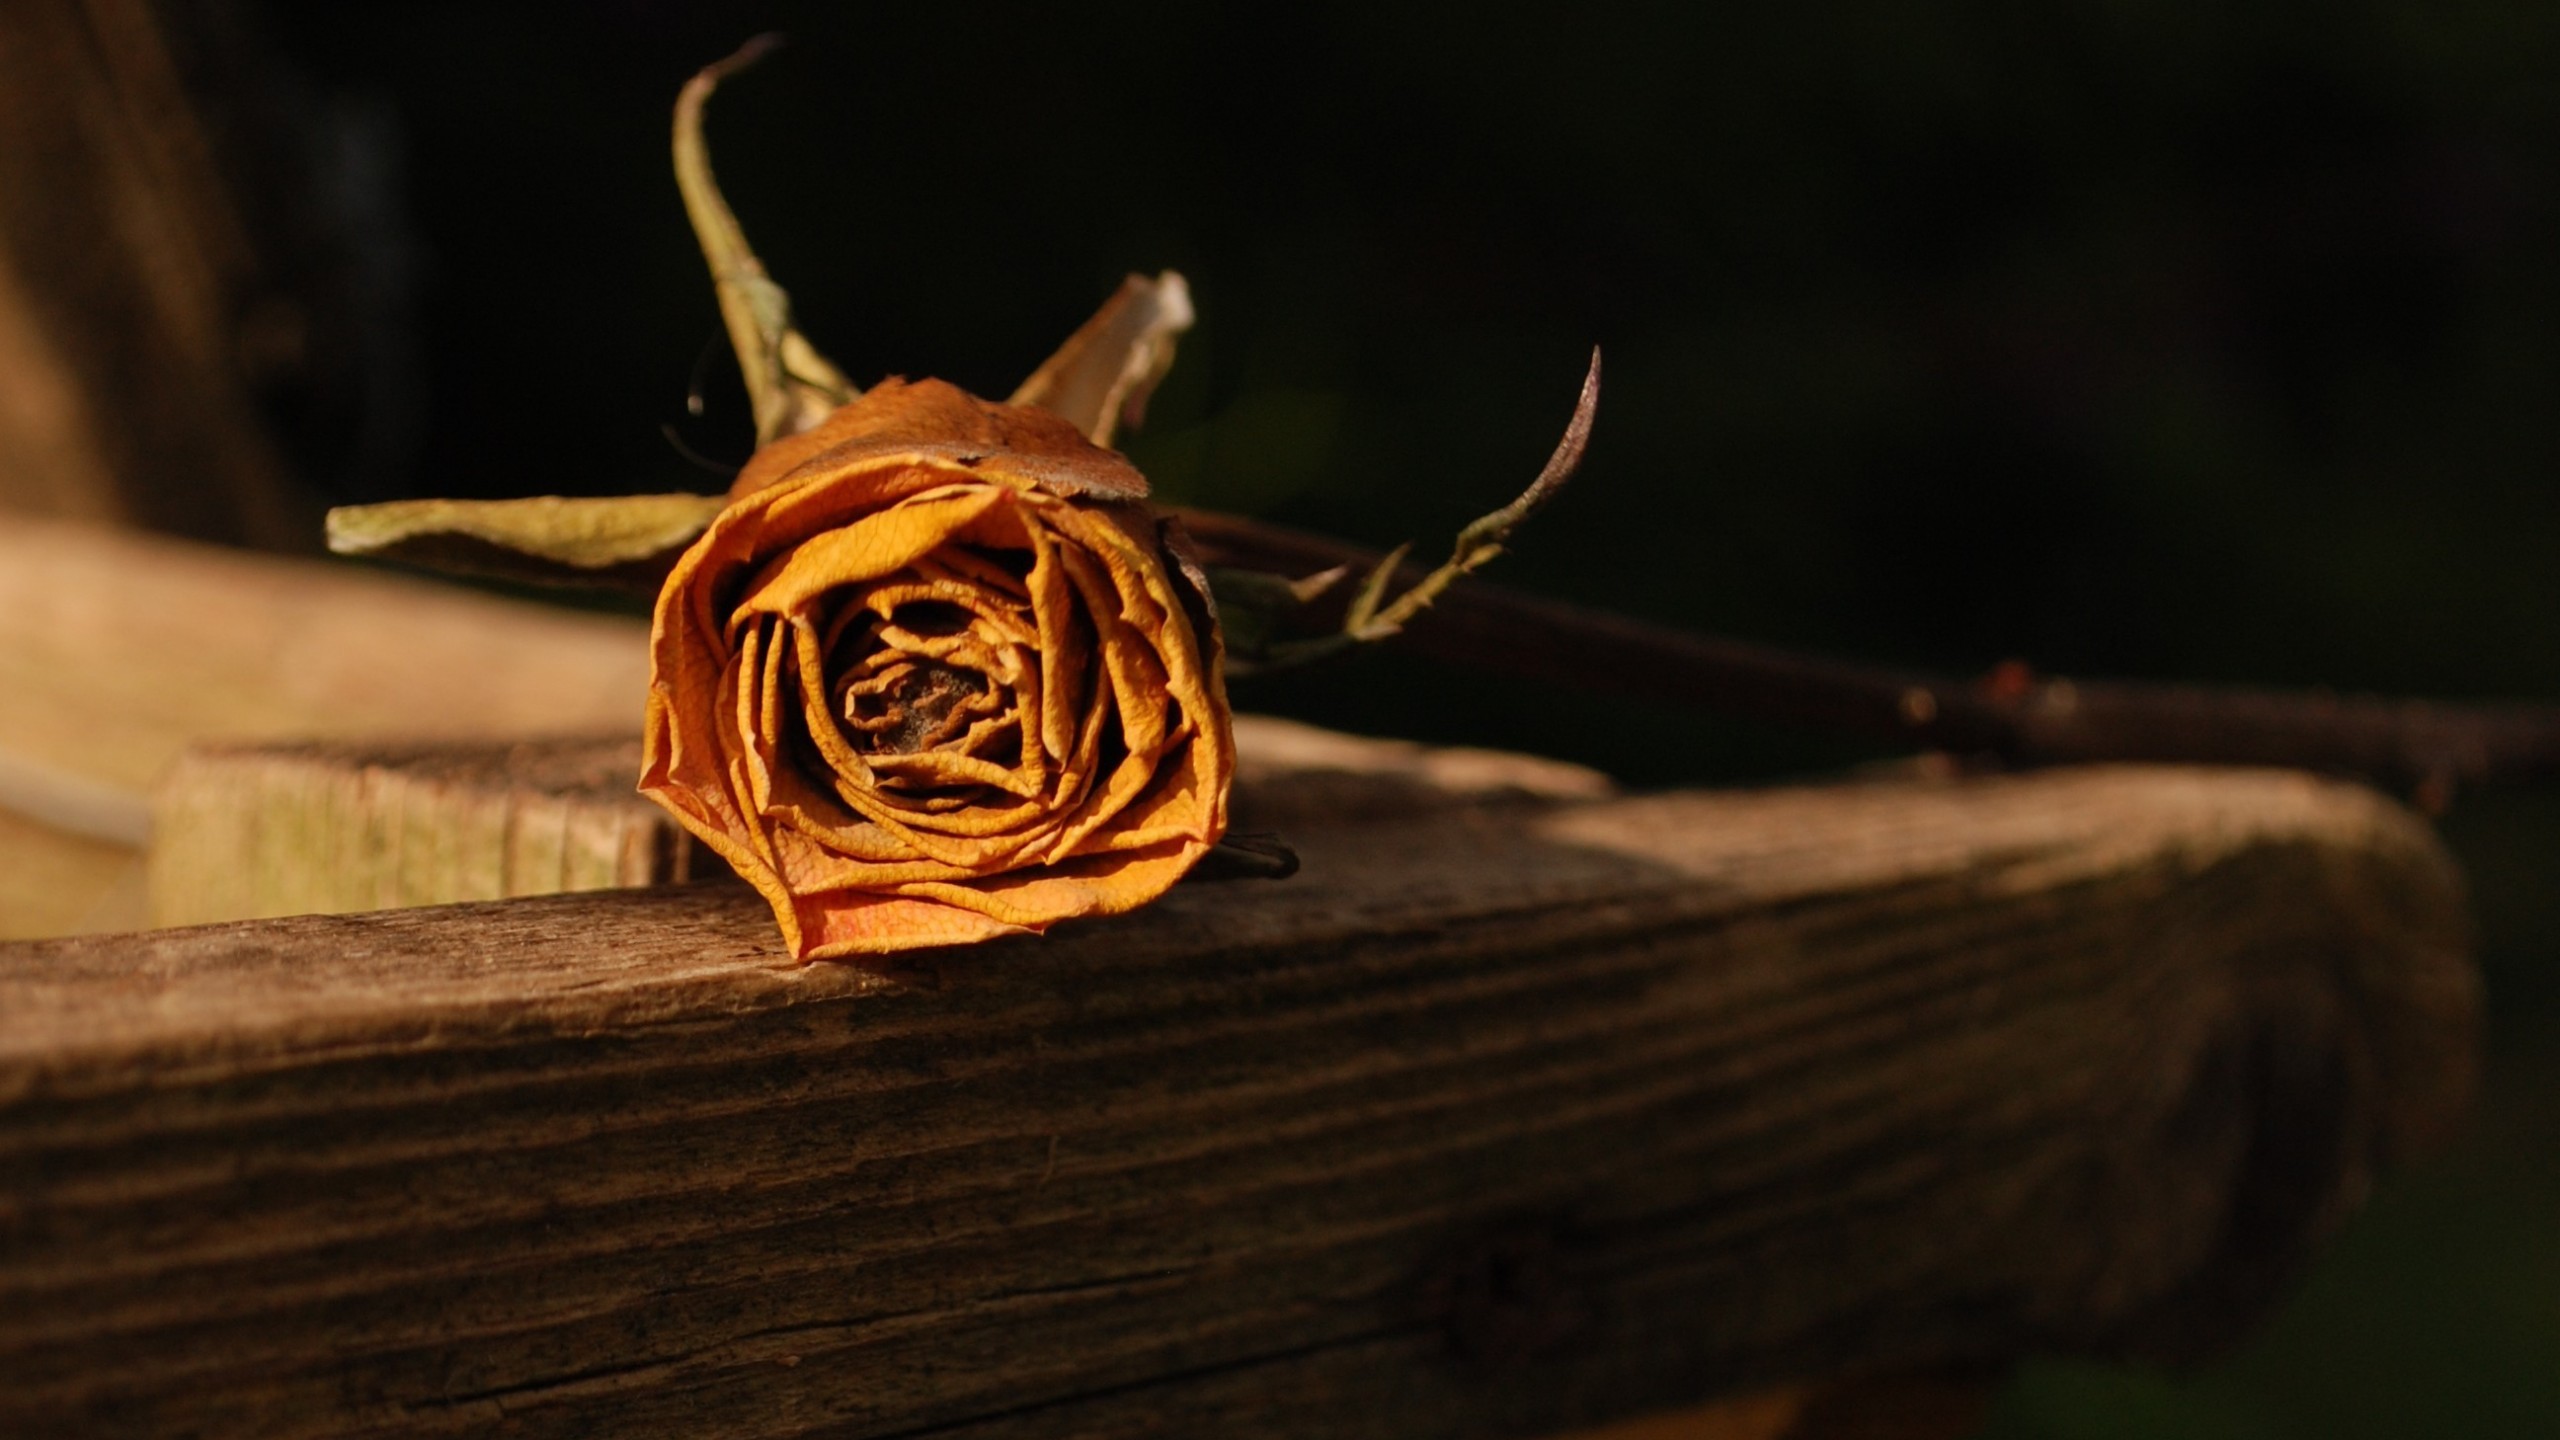 Rose Flowers Yellow Flowers Dry Wooden Surface 2560x1440